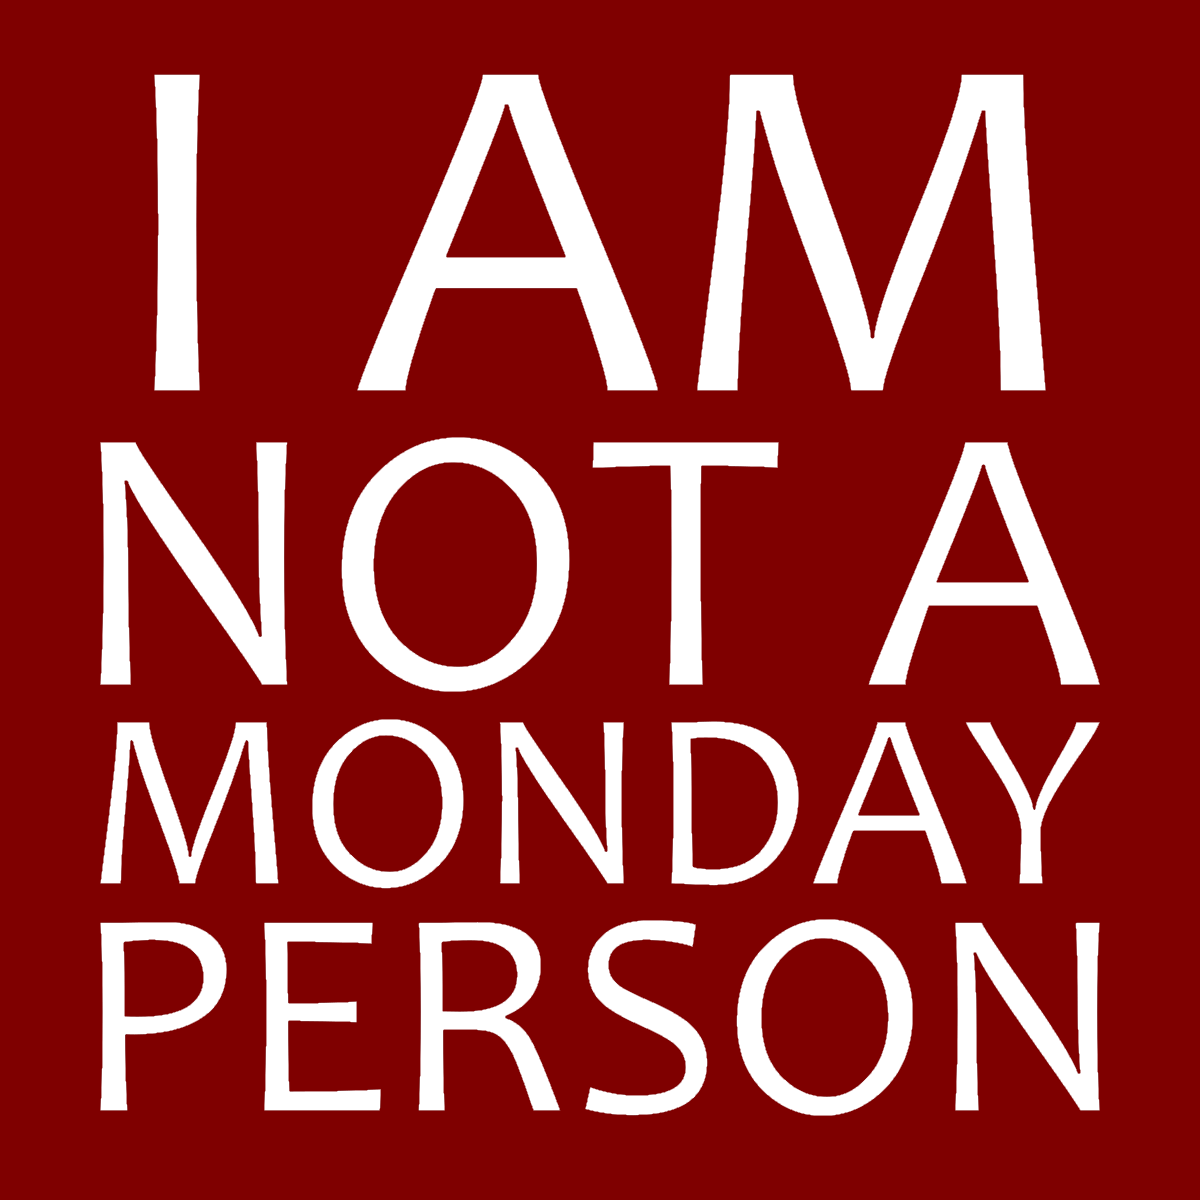 I Am Not A Monday Person - Engineering Outfitters